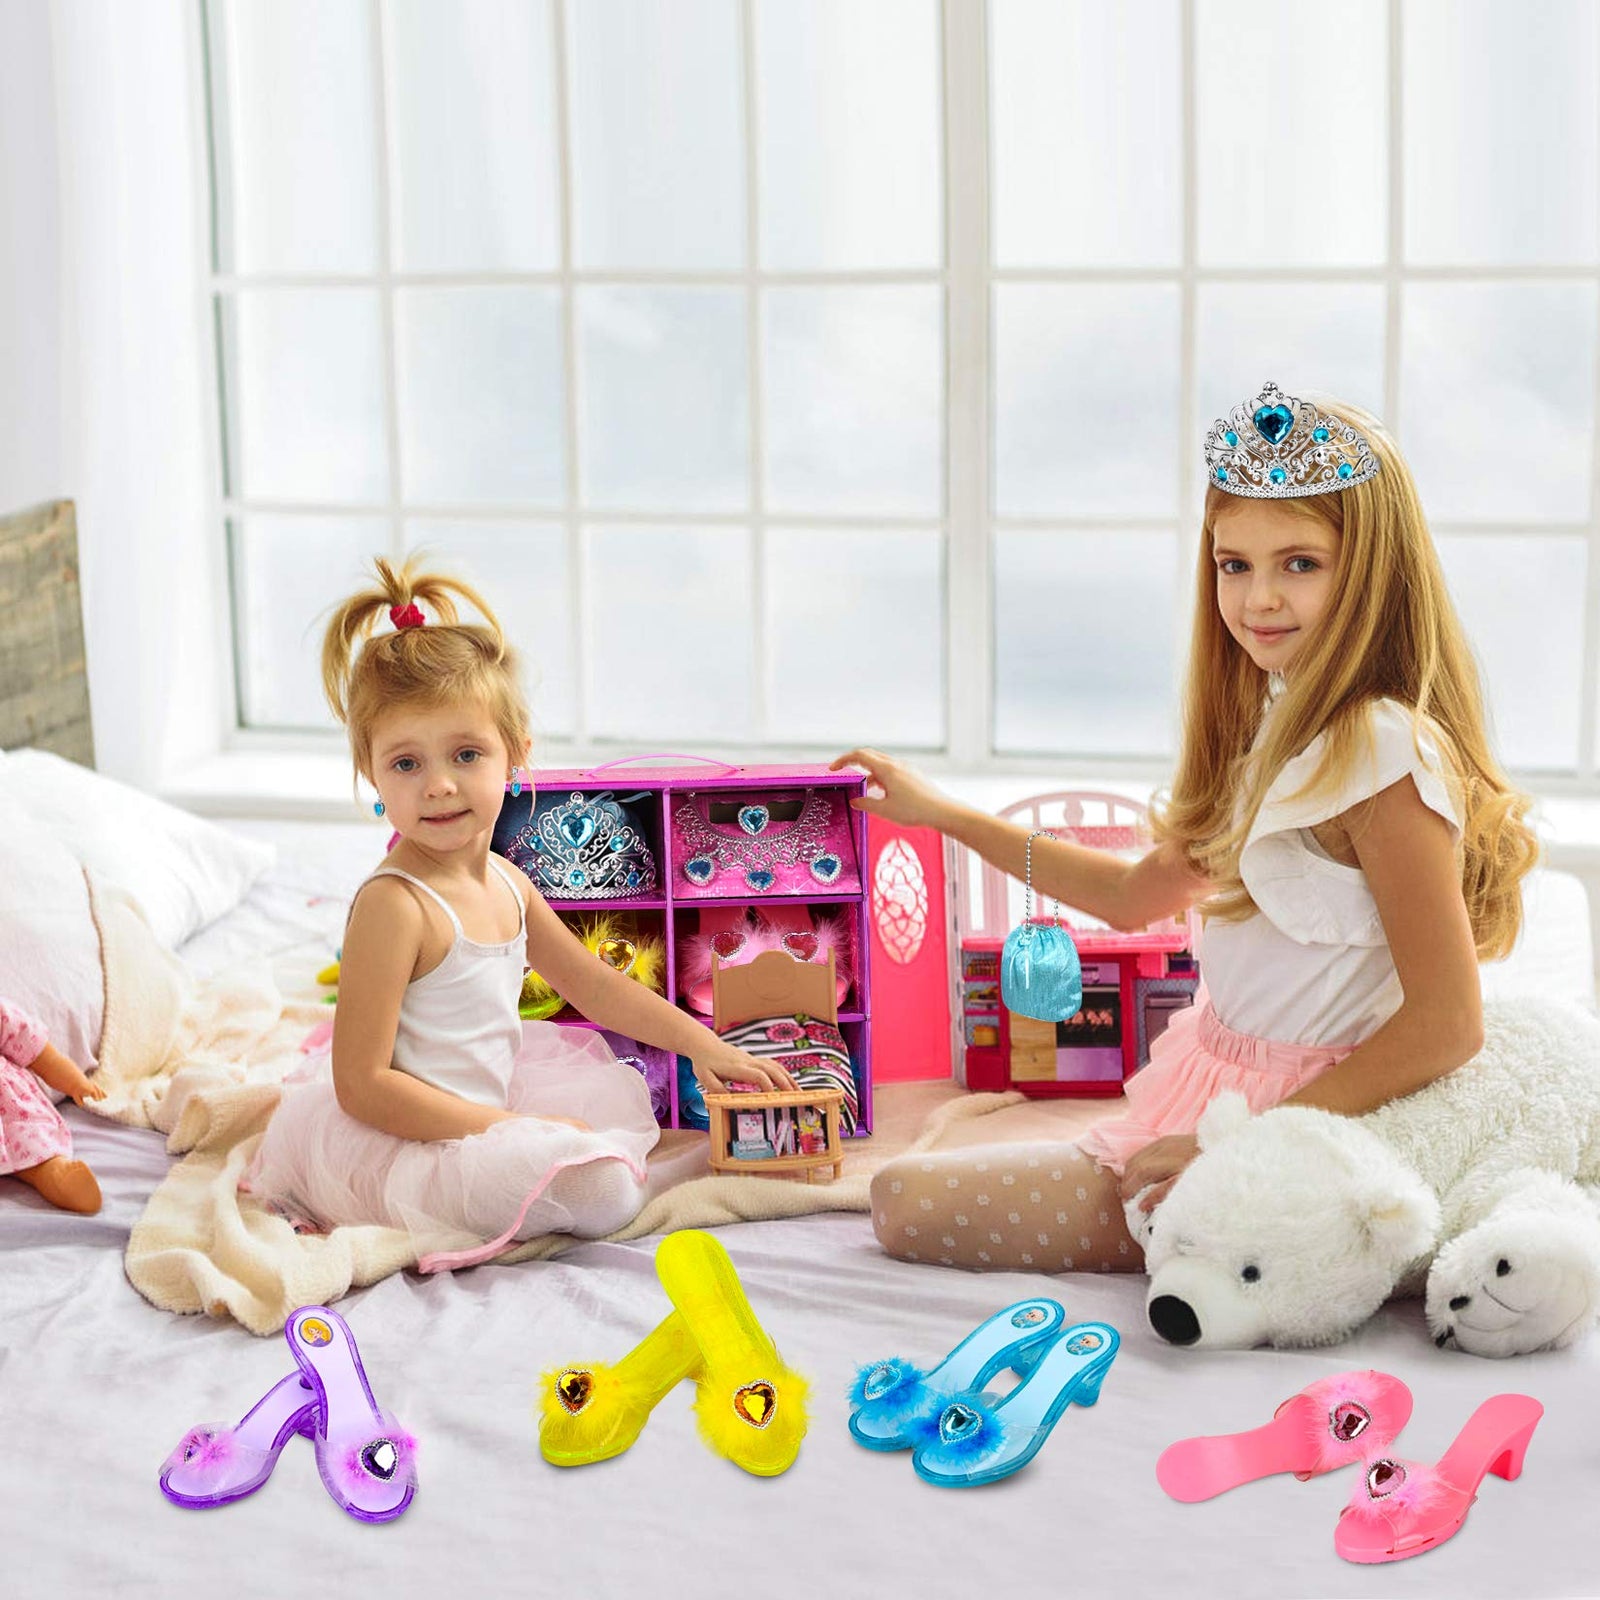 Princess Dress Up Shoes Set Girls Role Play Shoes Pretend Jewelry Toys Set Gift Set 4 Pairs of Shoes Kit Collection of Tiara Crown Earrings Necklace Rings Handbag Gloves for Girls Aged 3-6 Years Old